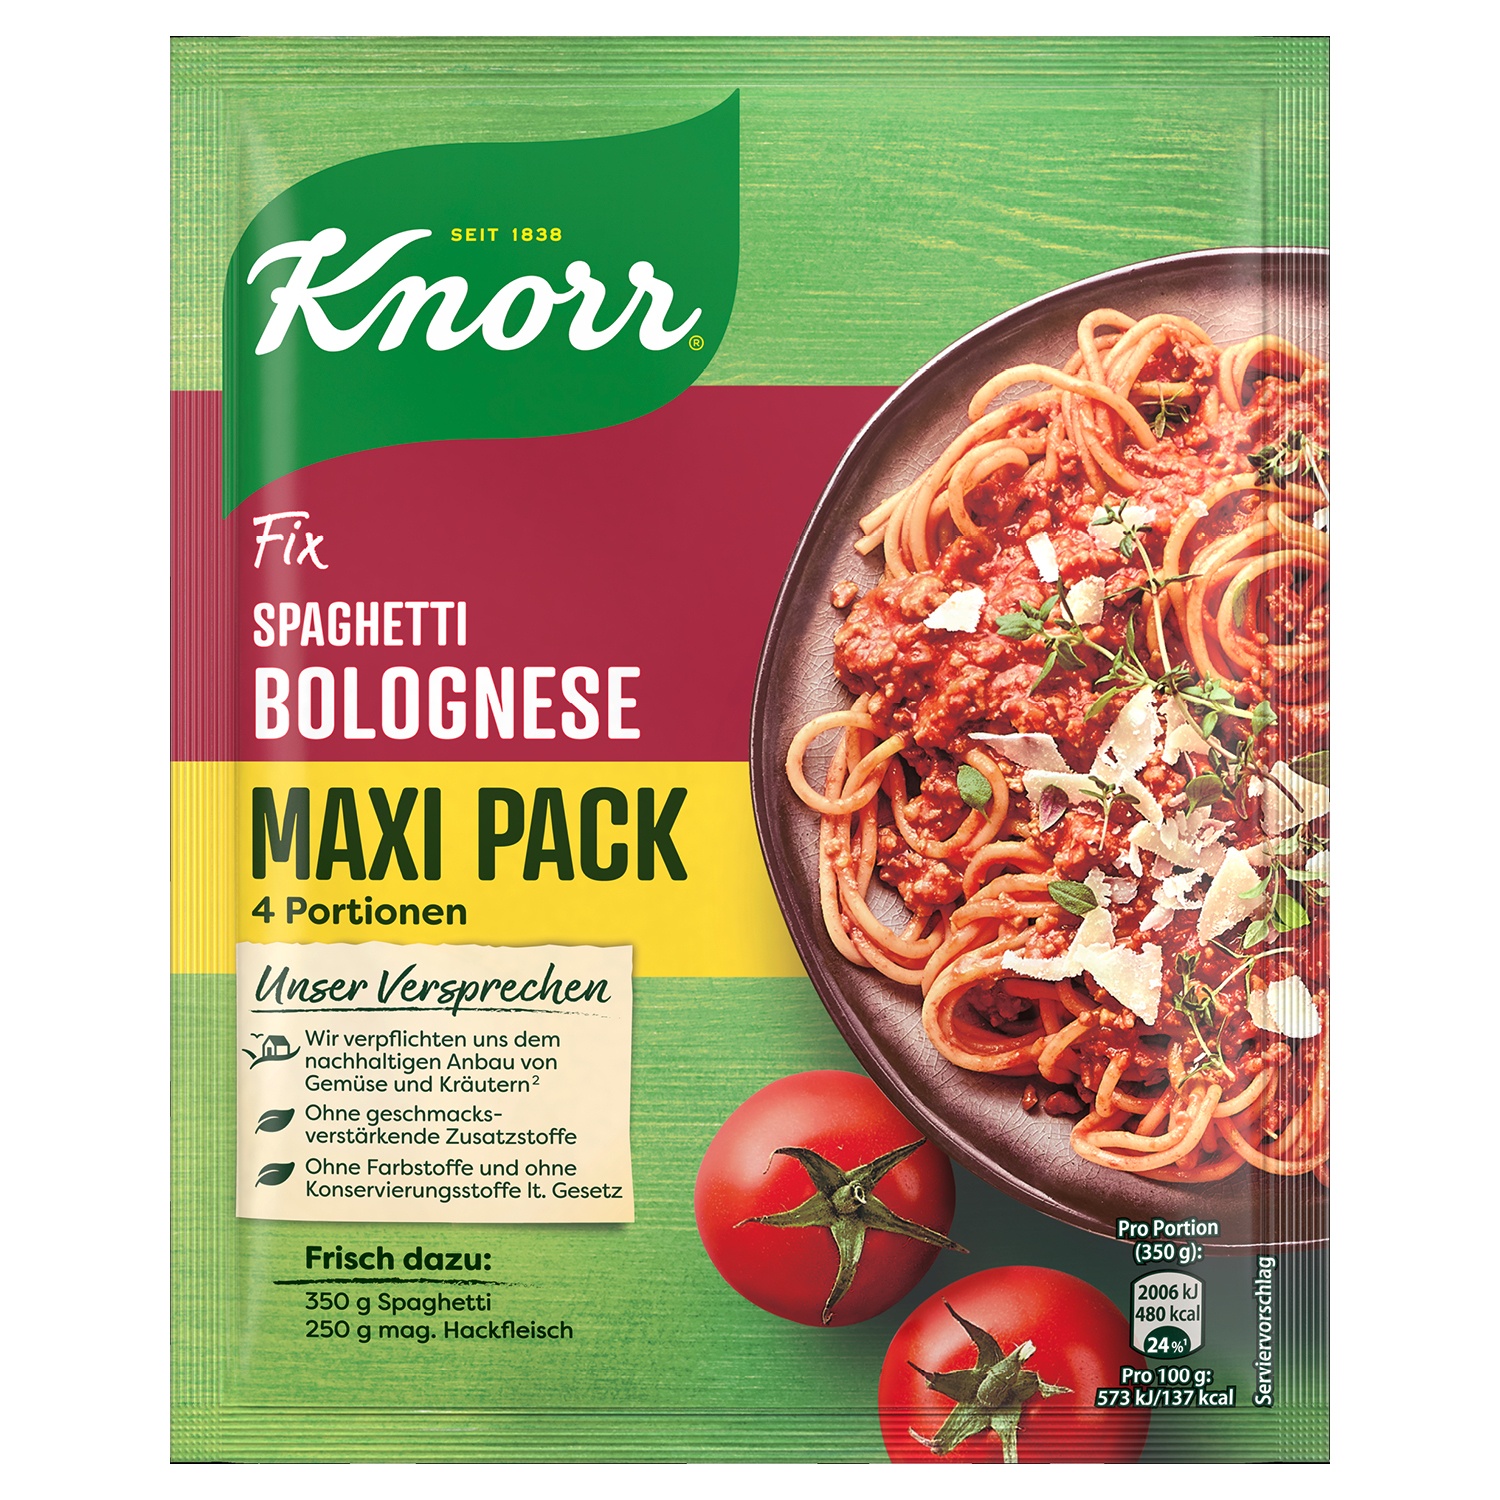 Knorr® Fix, MAXI PACK 51g